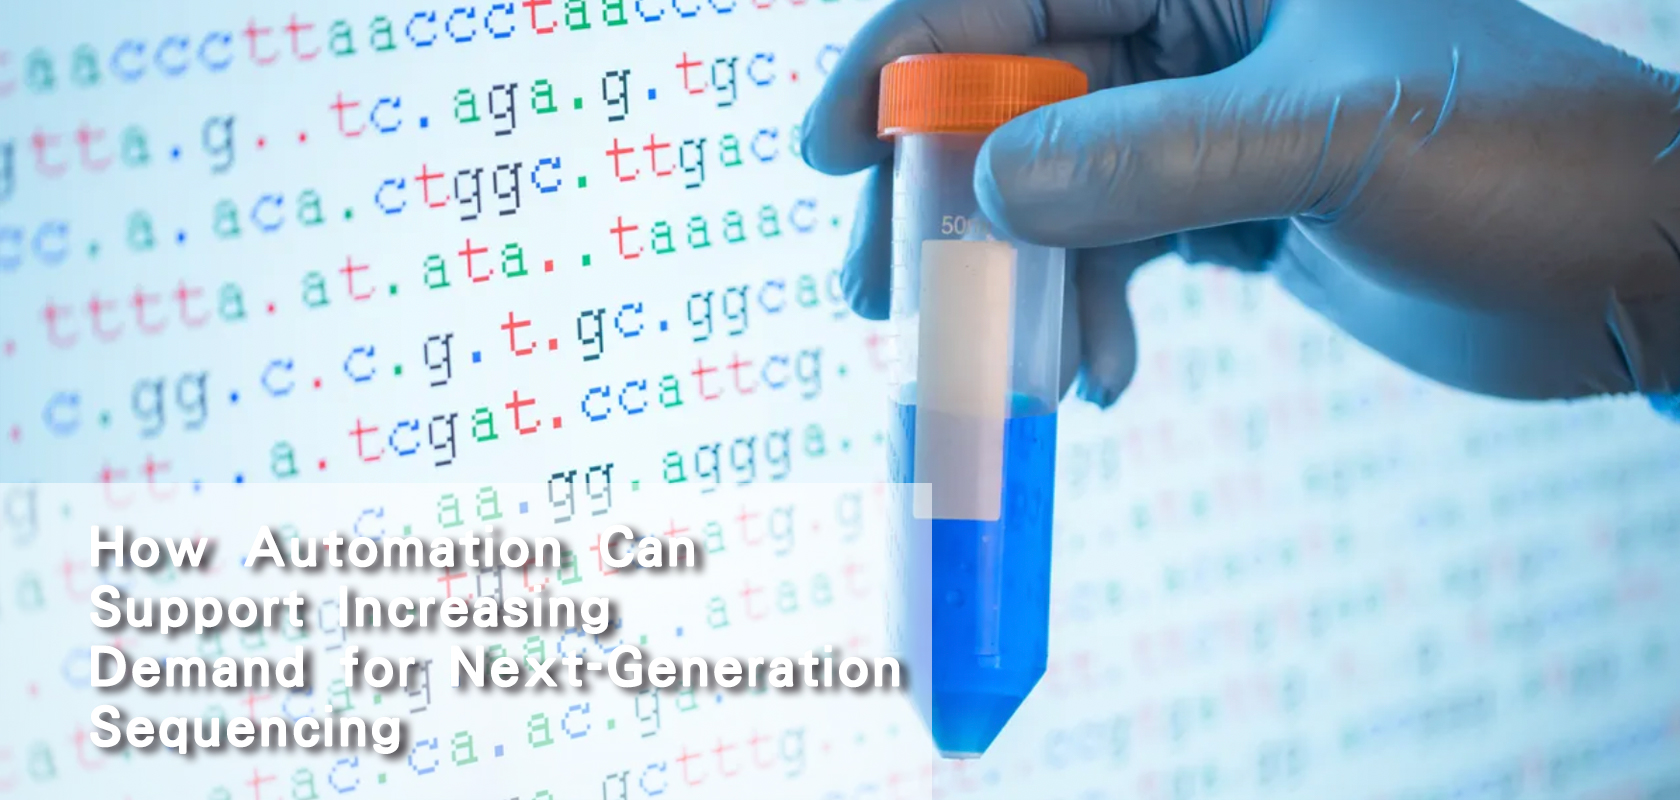 How Automation Can Support Increasing Demand for Next-Generation Sequencing